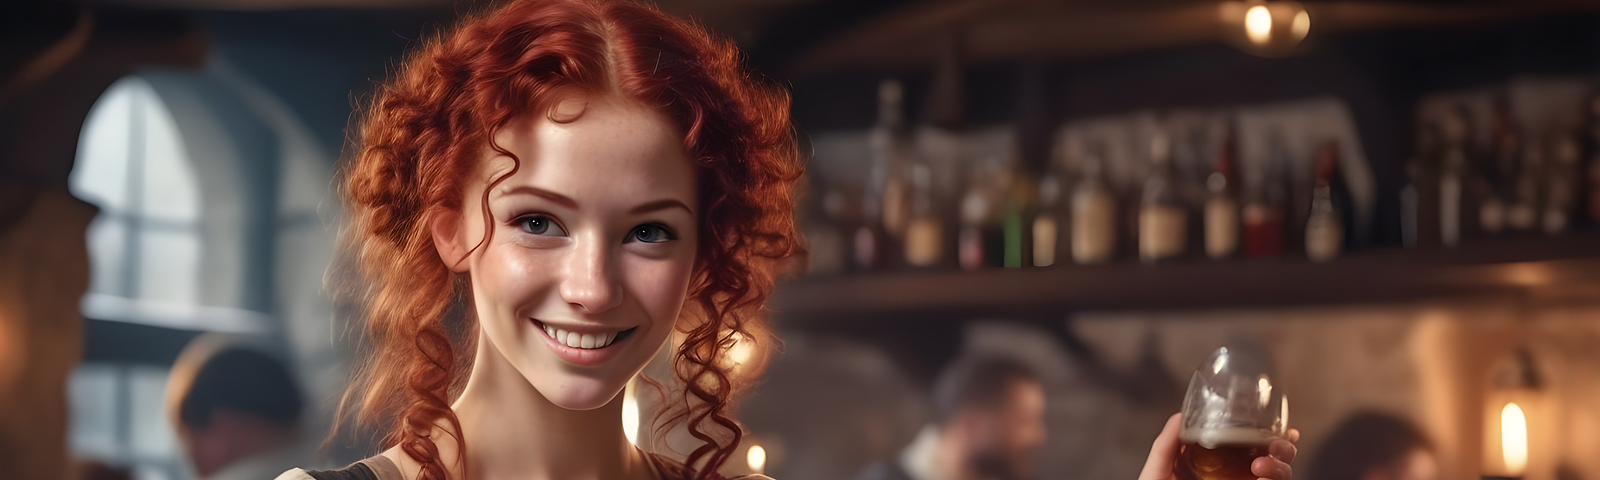 A barmaid with red curly hair